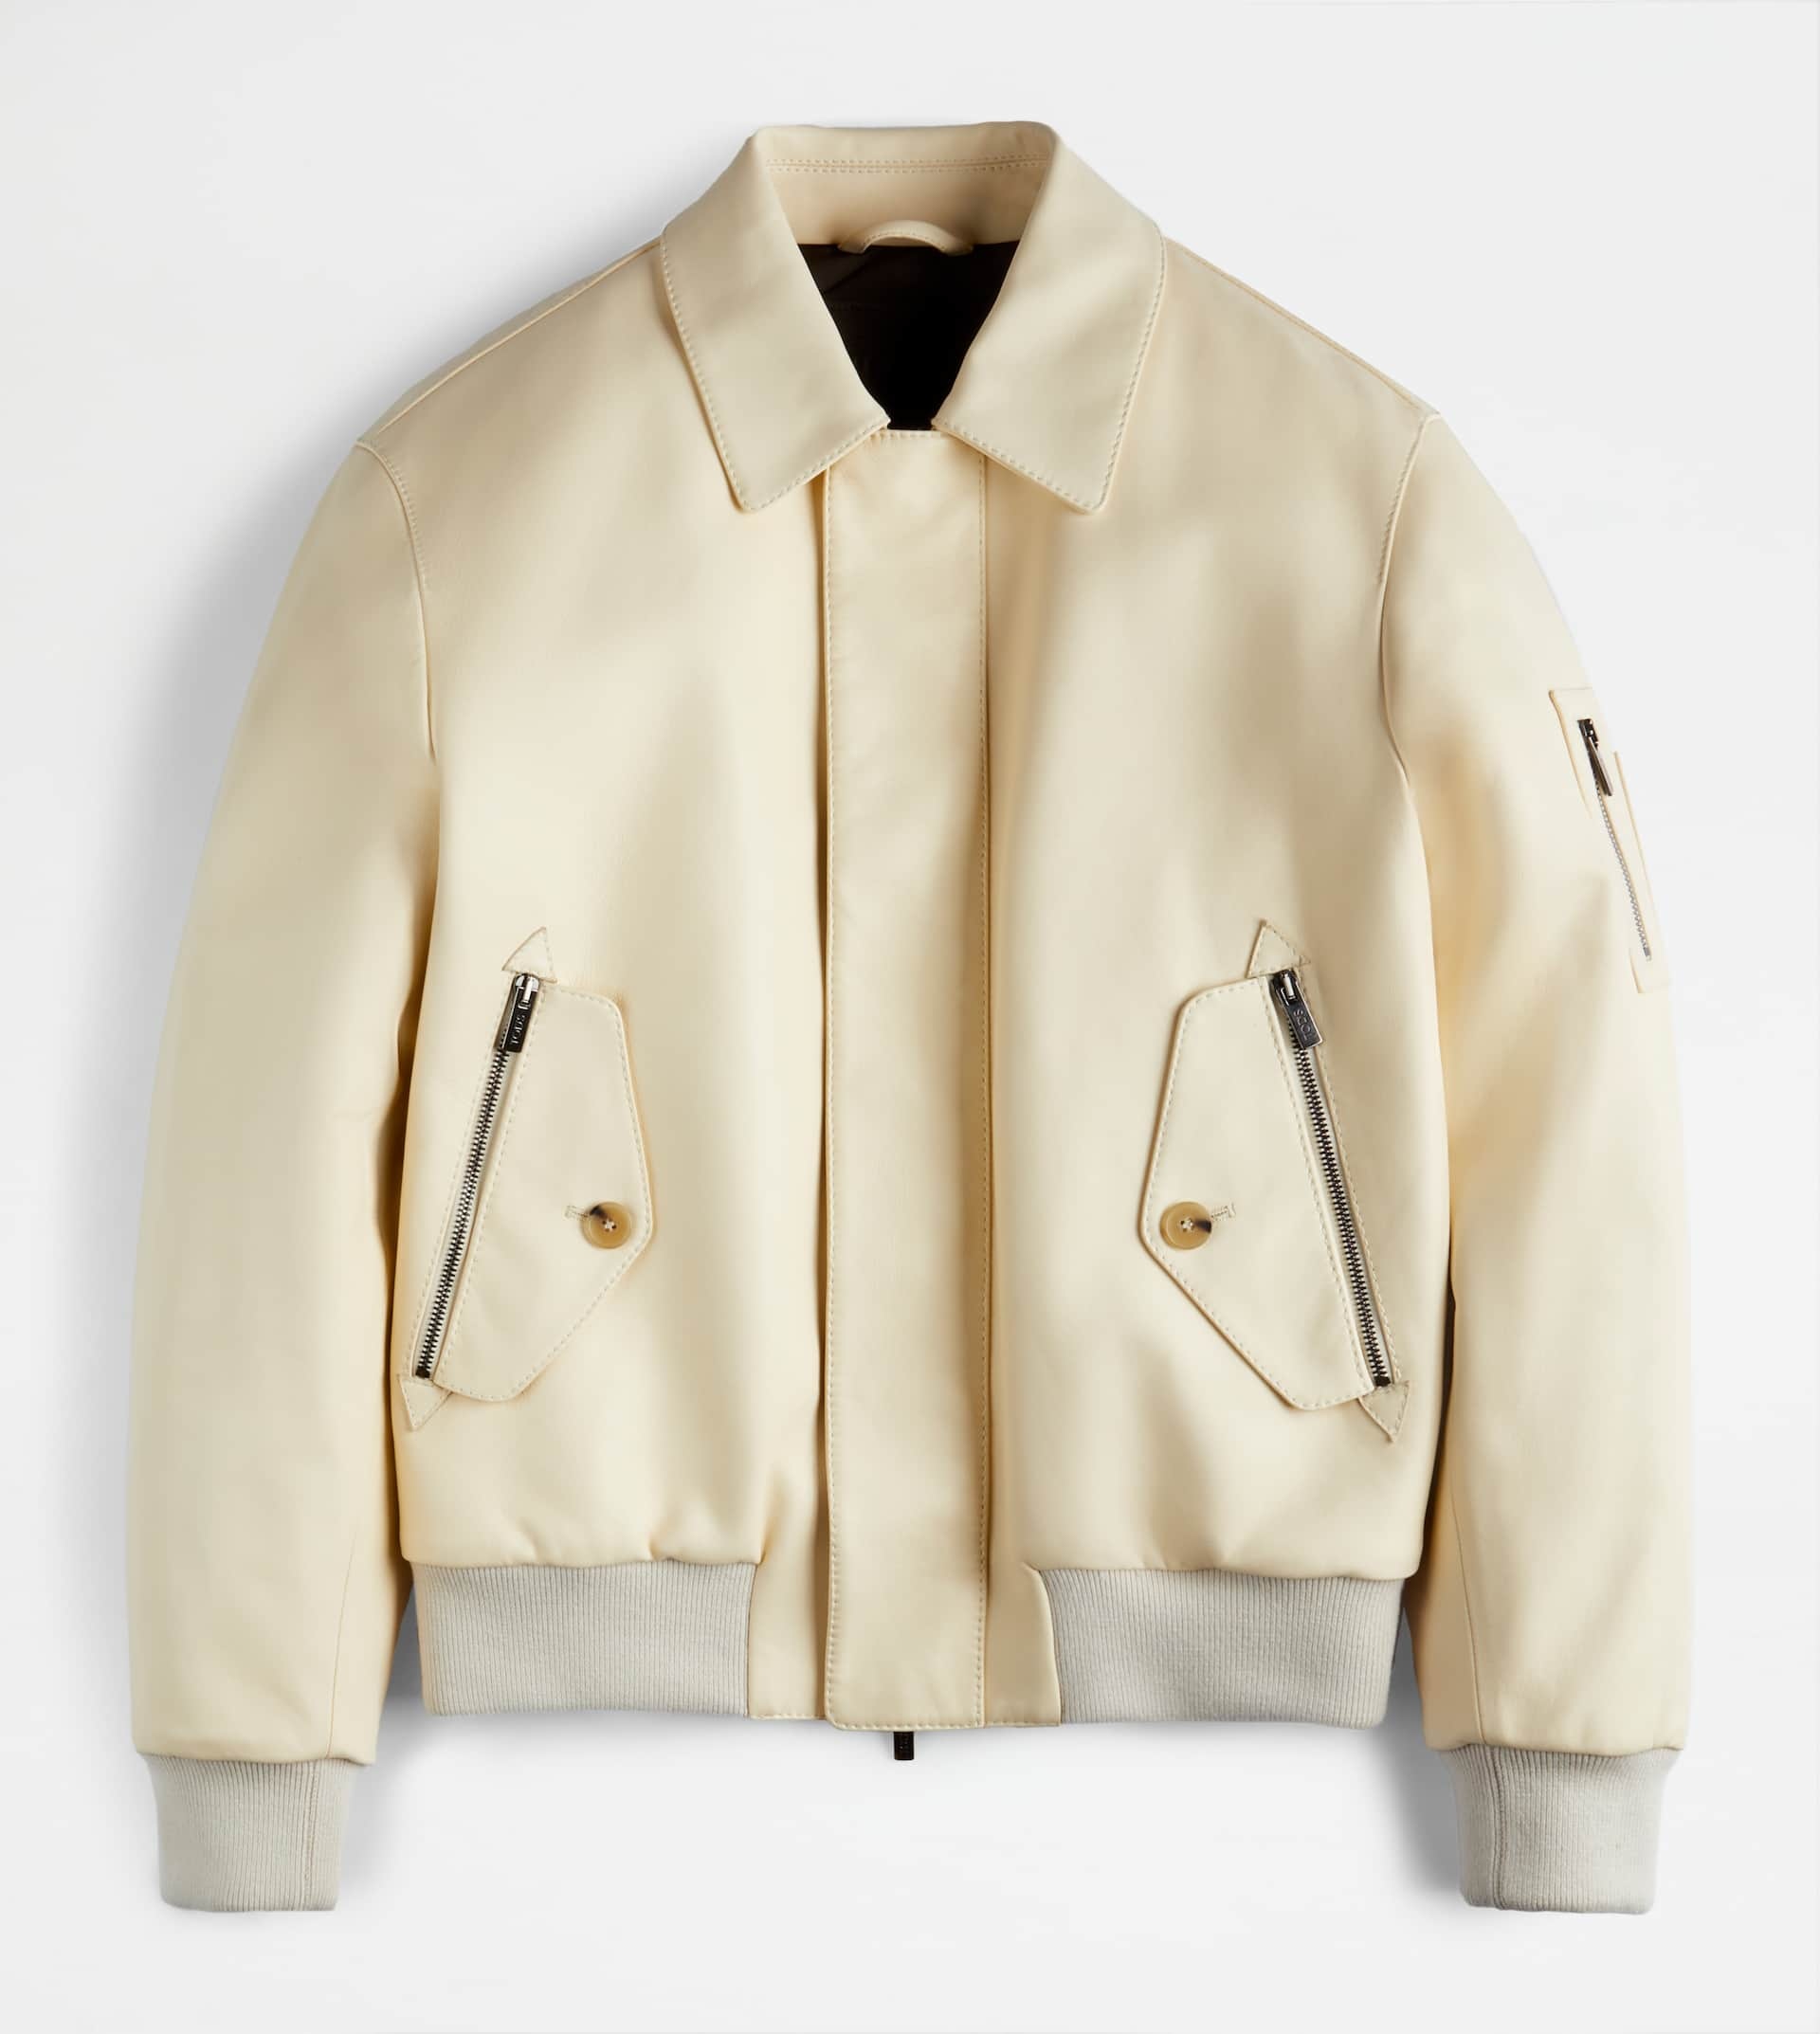 BOMBER JACKET IN NAPPA LEATHER - WHITE - 1